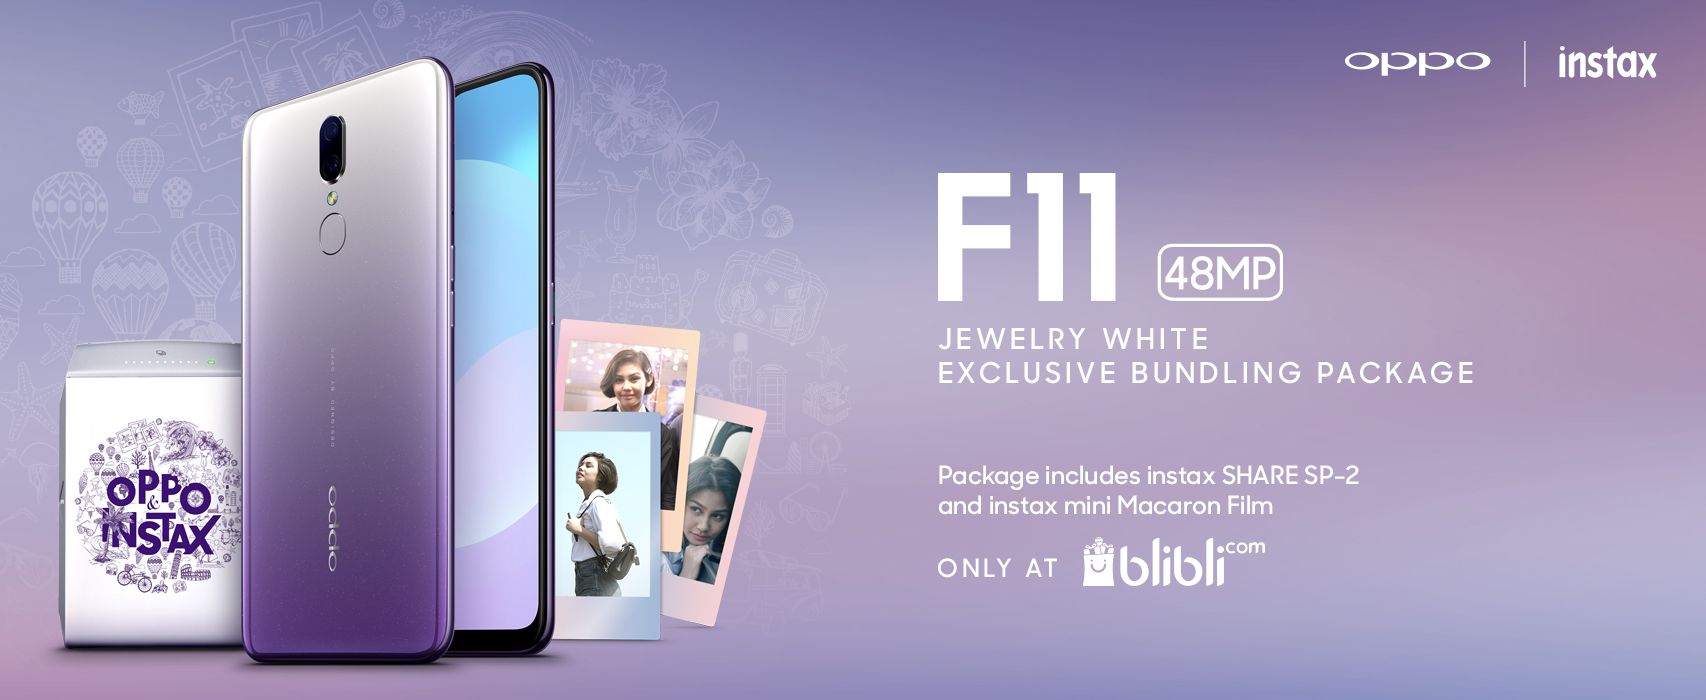 OPPO F11 Jewelery White Exclusive Bundling Package